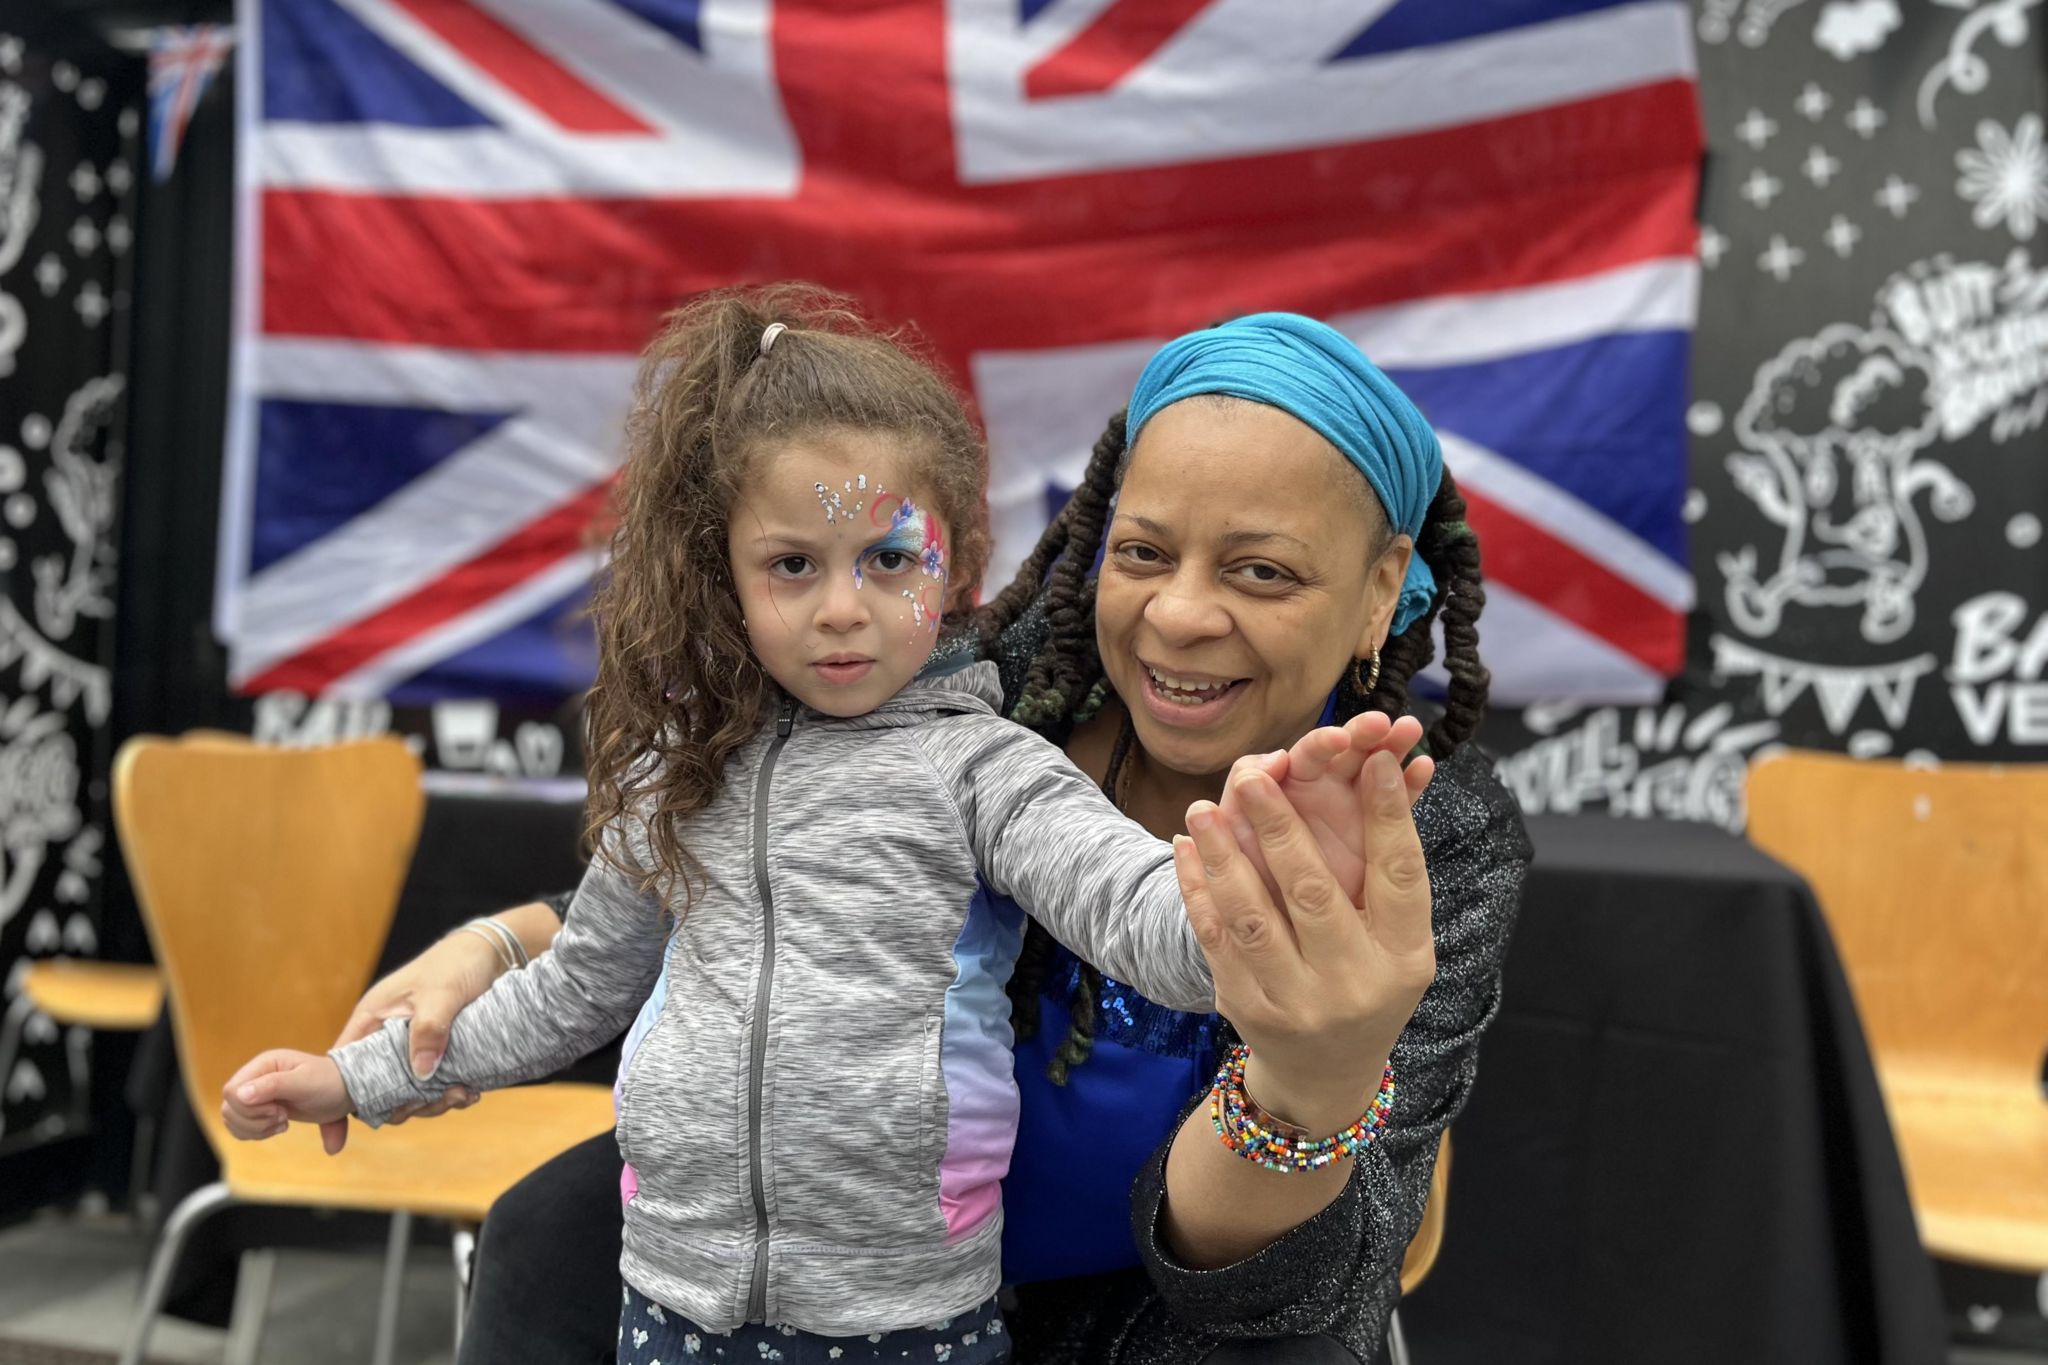 Another little girl gets her face painted with the Union Jack colours